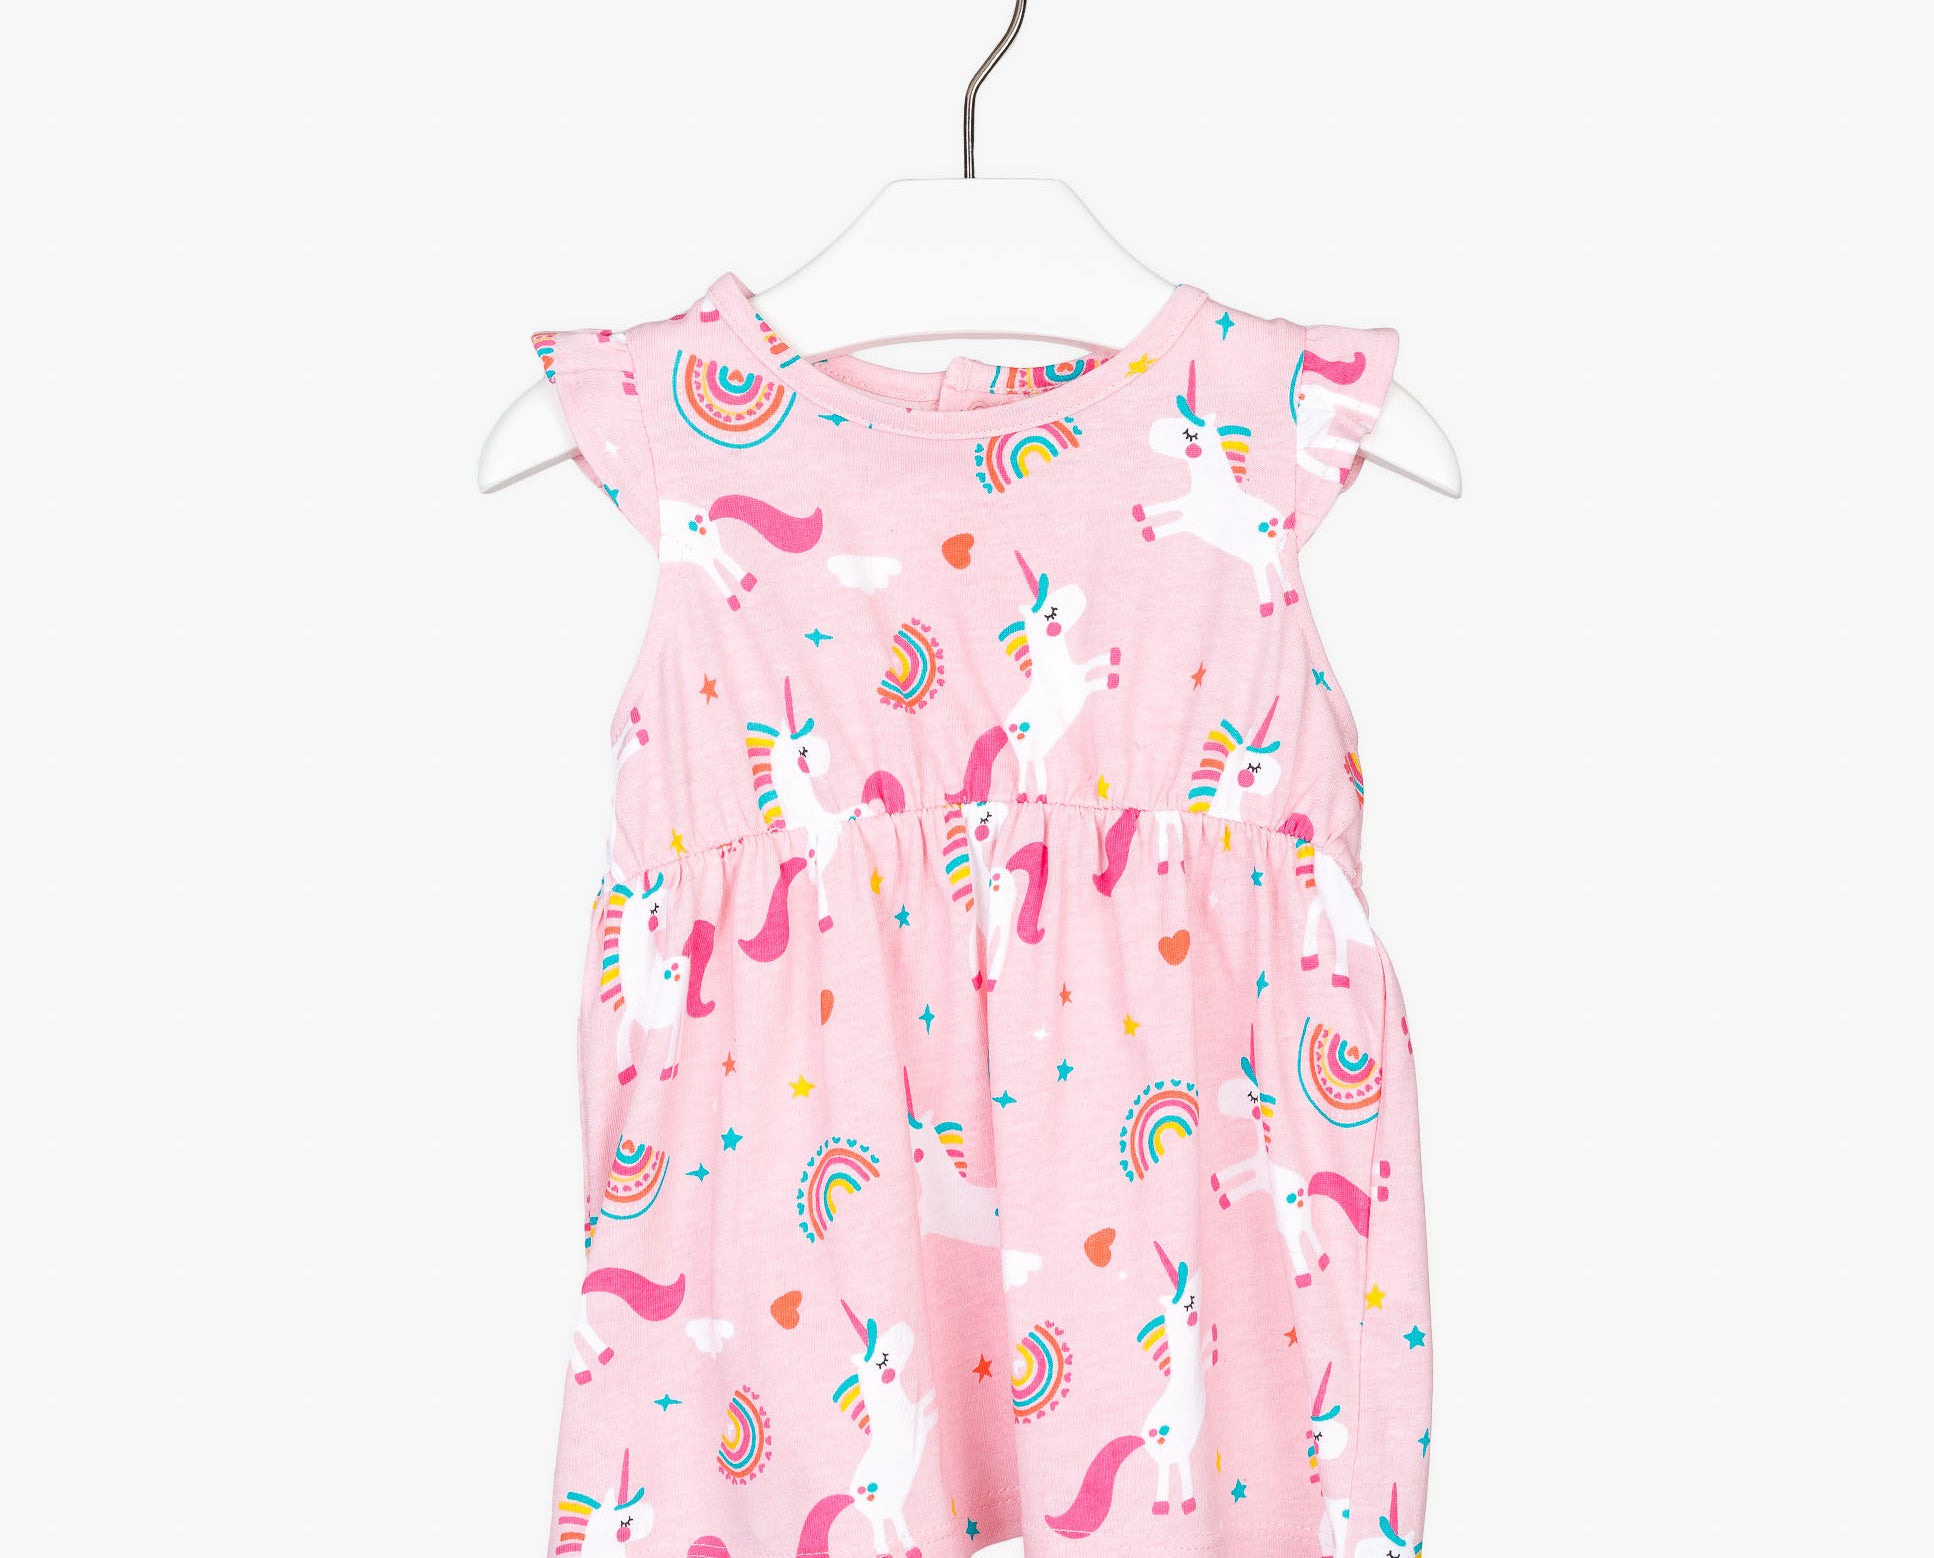 Losan sleeveless cotton dress for baby girls in light pink with a crew neck unicorn and rainbow prints on the front